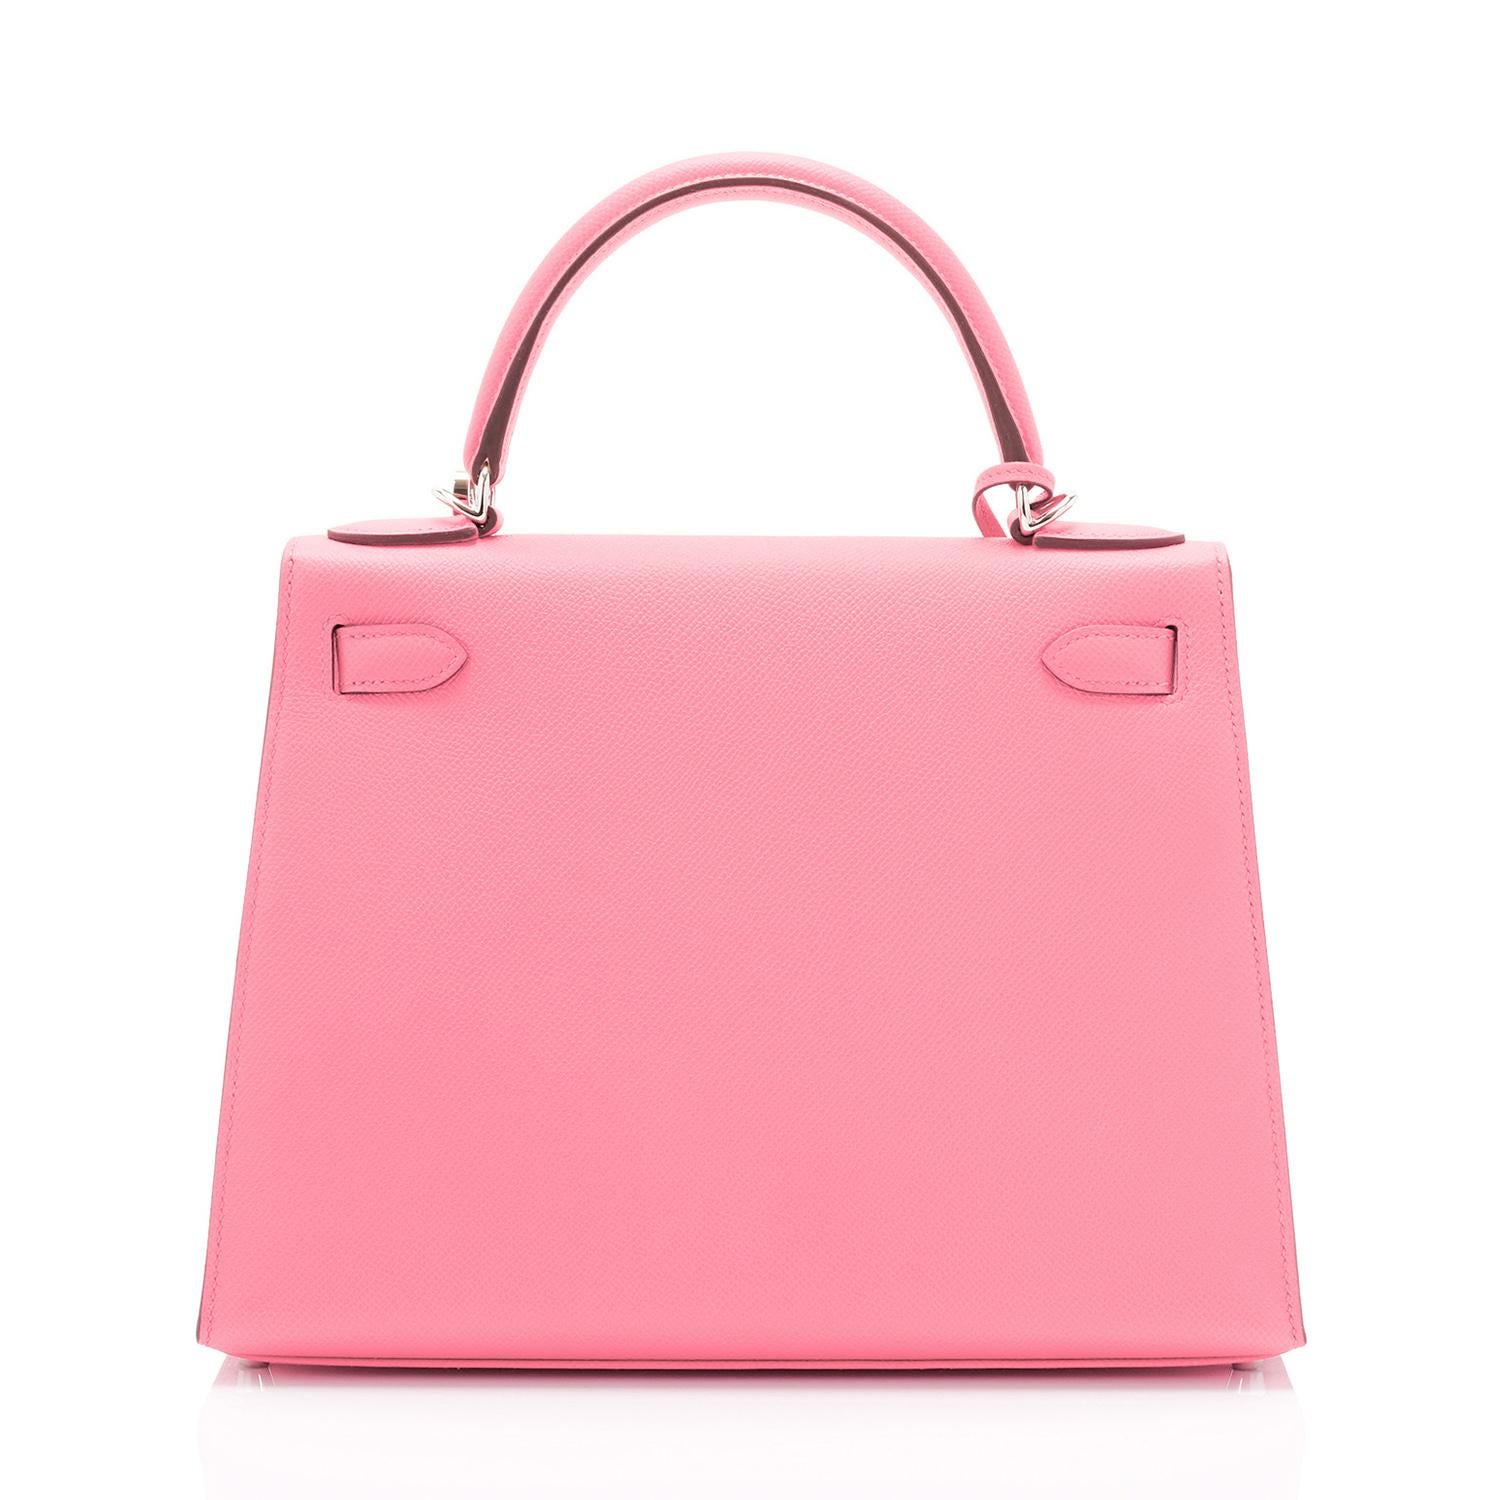 Hermes Kelly 28cm Rose Confetti Pink Sellier Shoulder Bag NEW IN BOX at ...